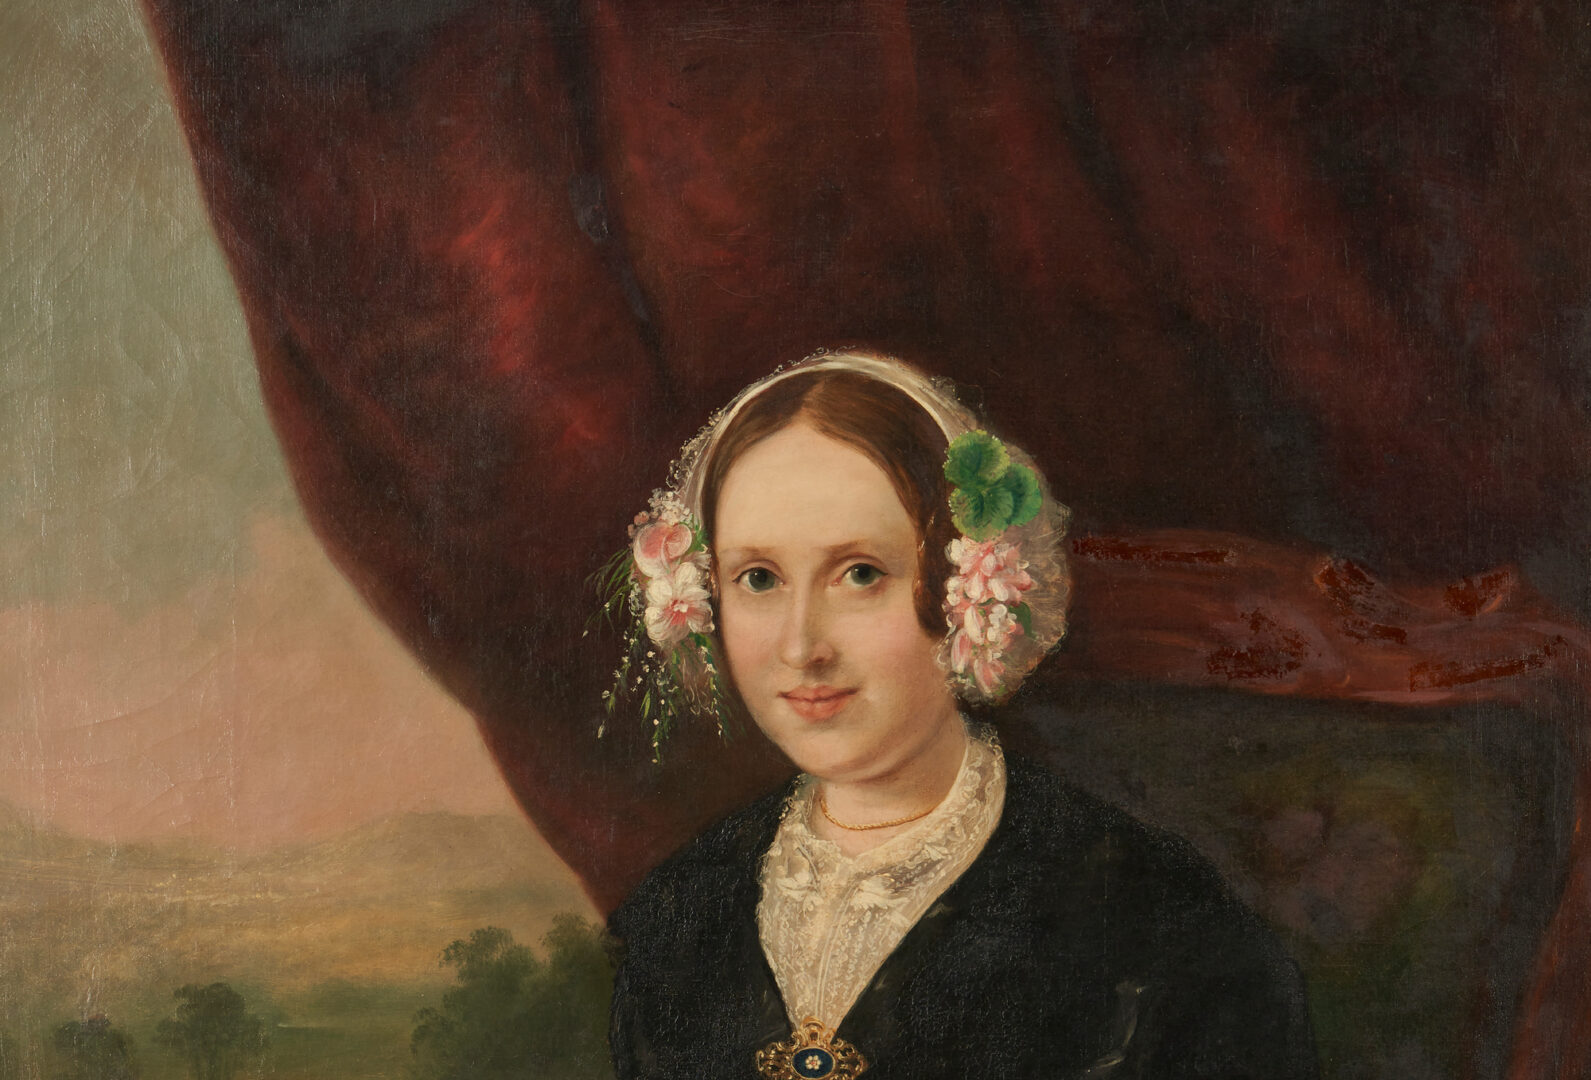 Lot 447: TN Portrait of a Young Woman, possibly W. H. Scarborough